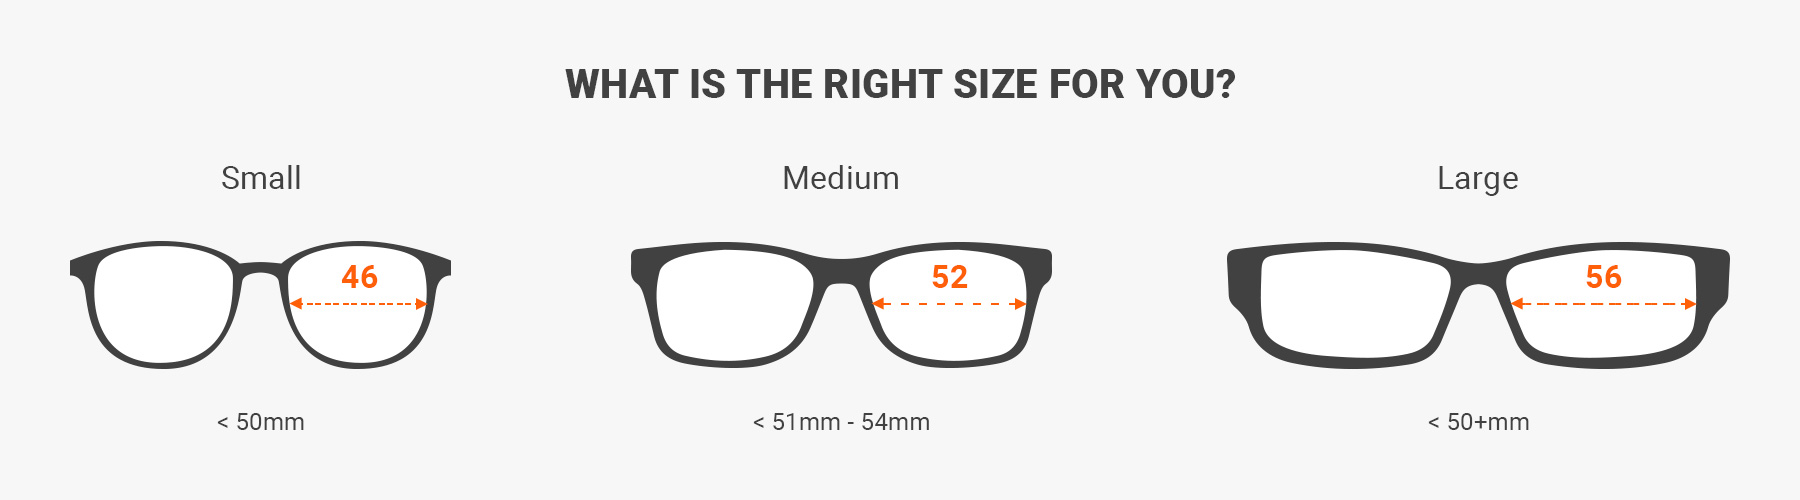 How to find your sunglasses size: Step by step | Lentiamo.co.uk